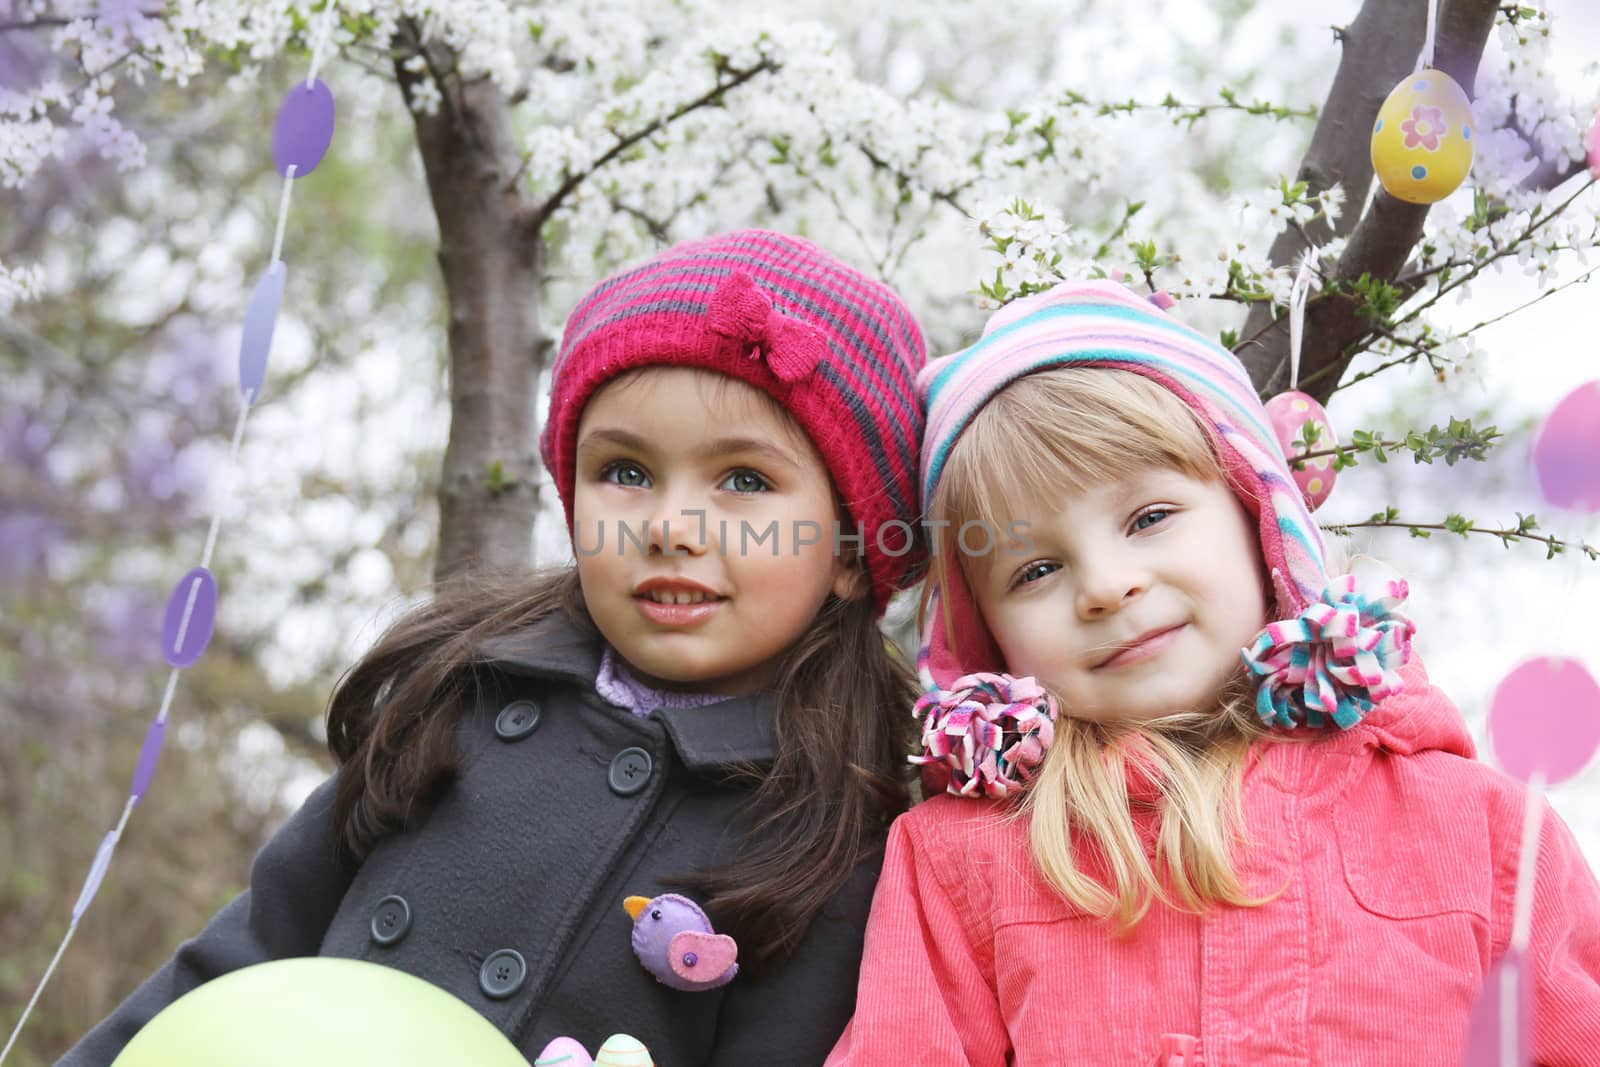 Pretty girls together holding painted egg outdoor in spring